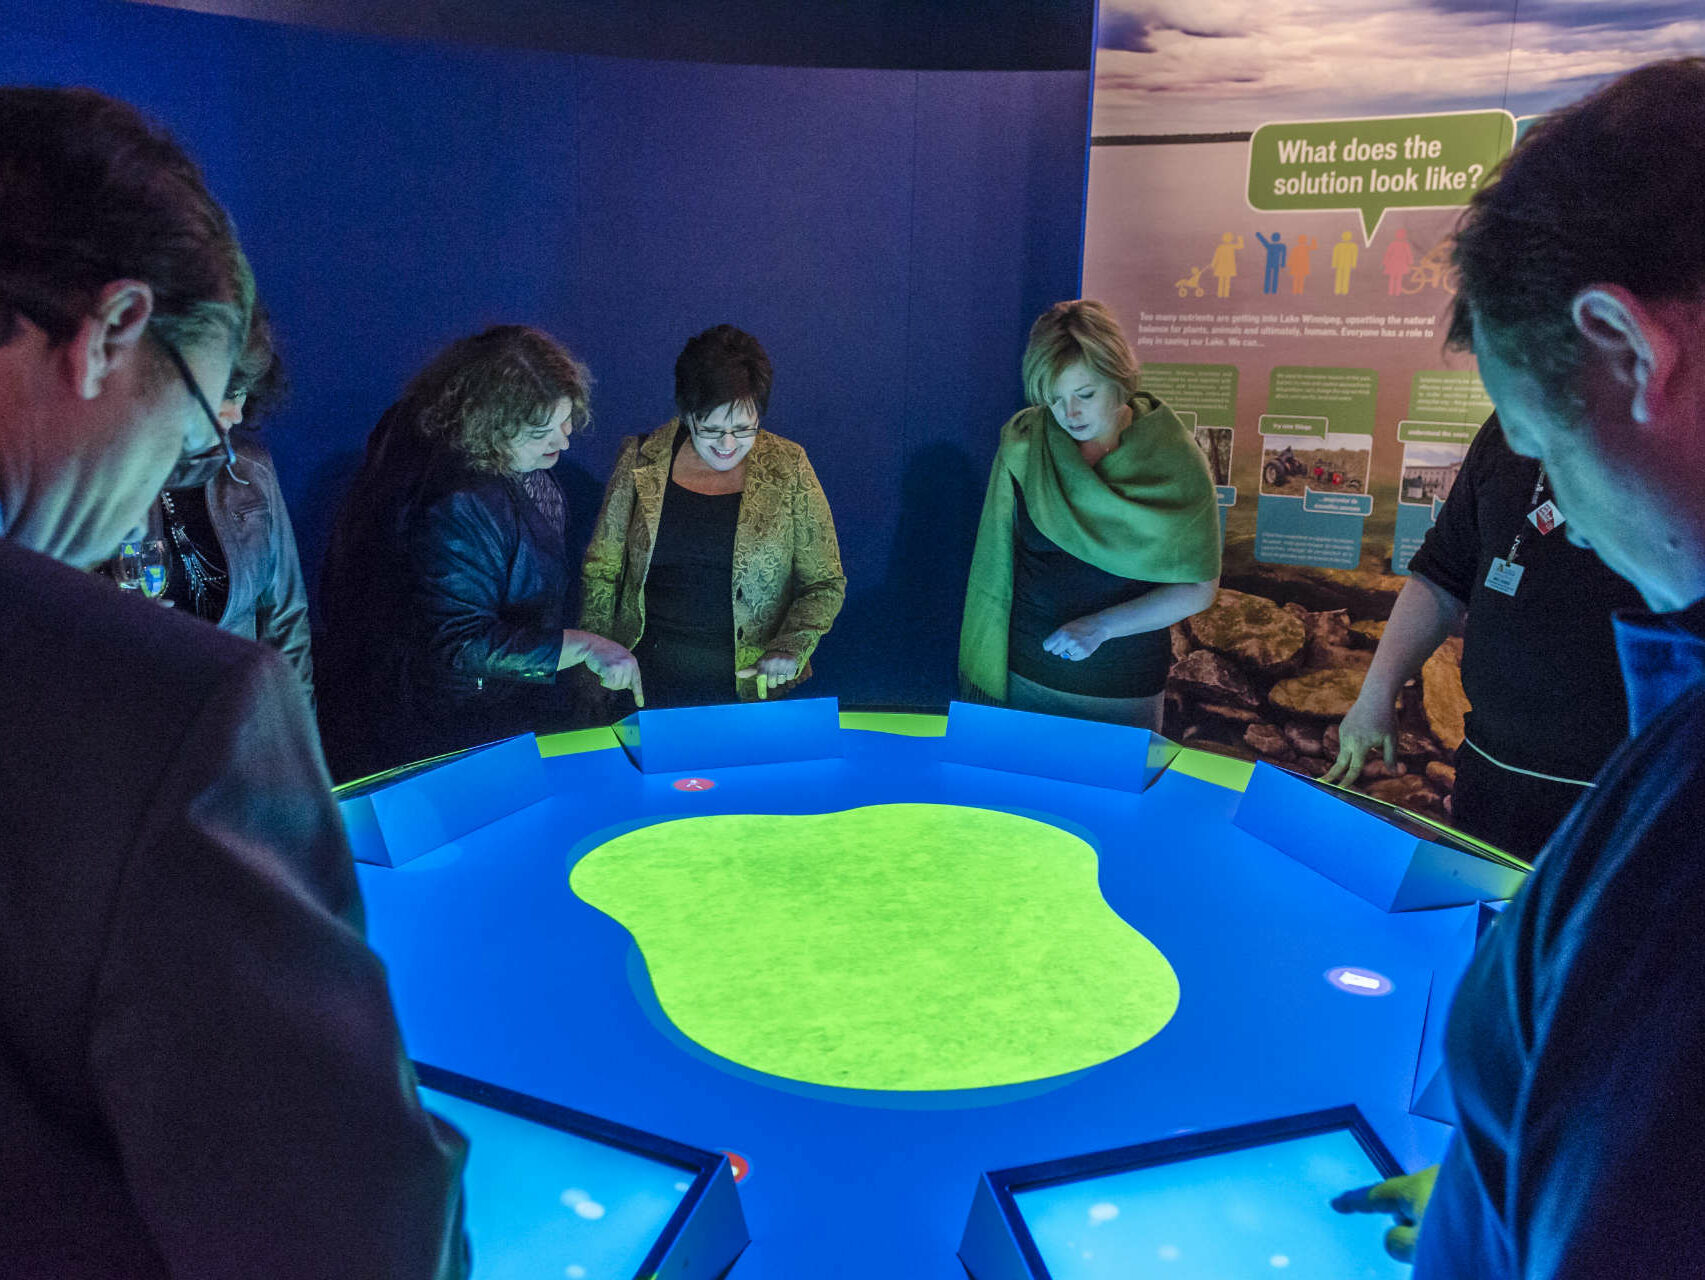 Group of adults interacting in the Lake Winnipeg display during a special event.